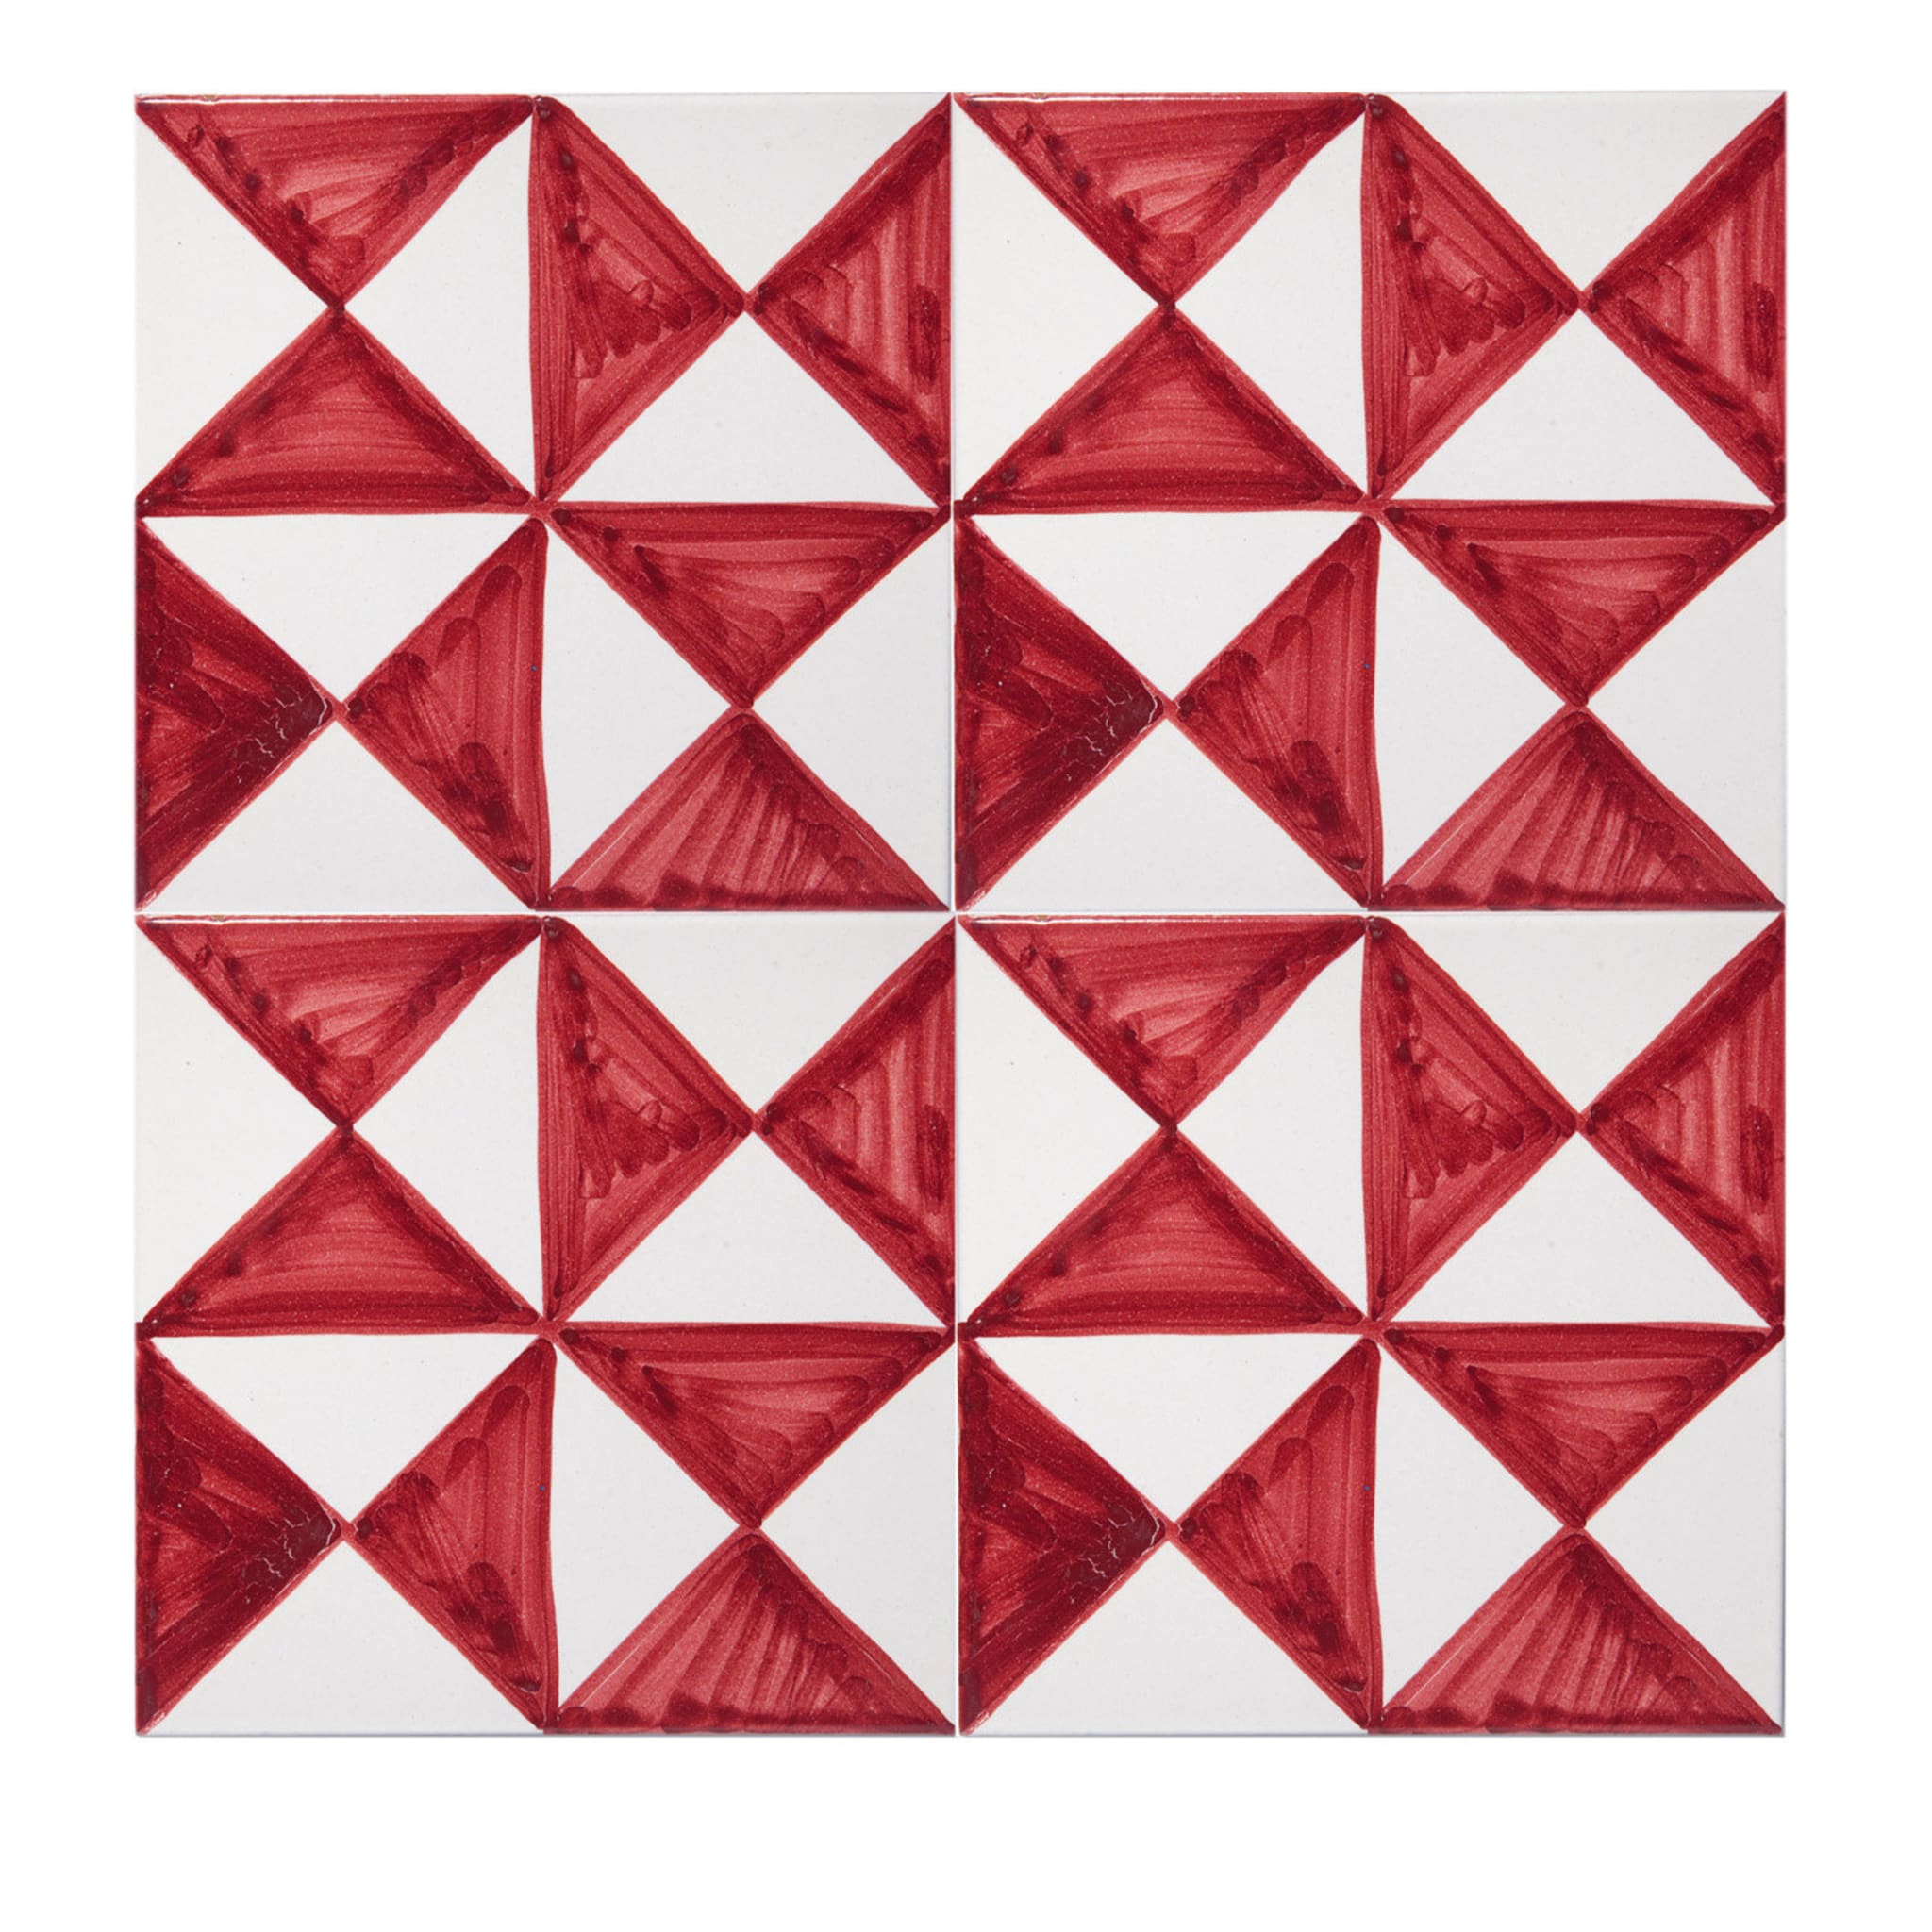 Set of 4 Riggiola Red Tiles - Main view